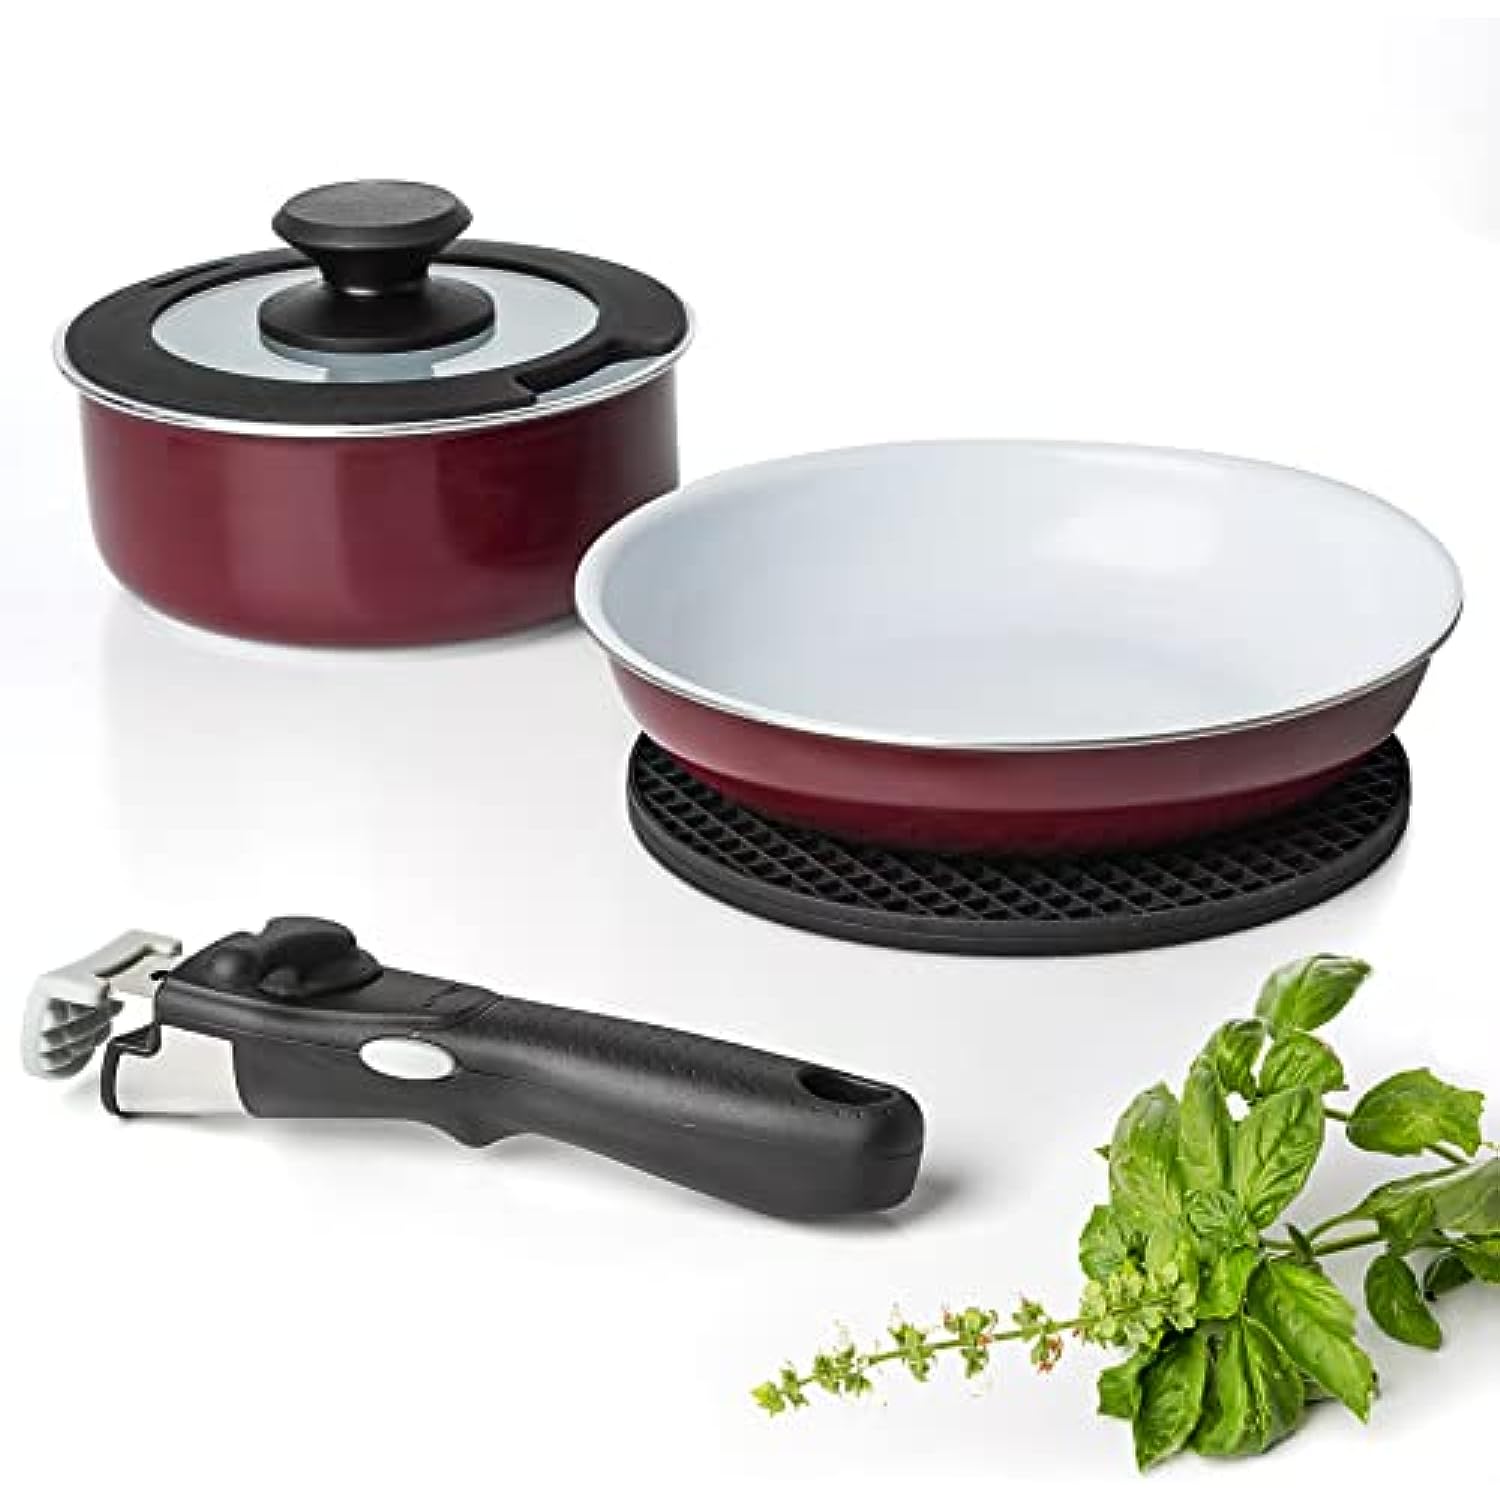 Pots and Pans with Removable Handle, Cookware Set with Ceramic